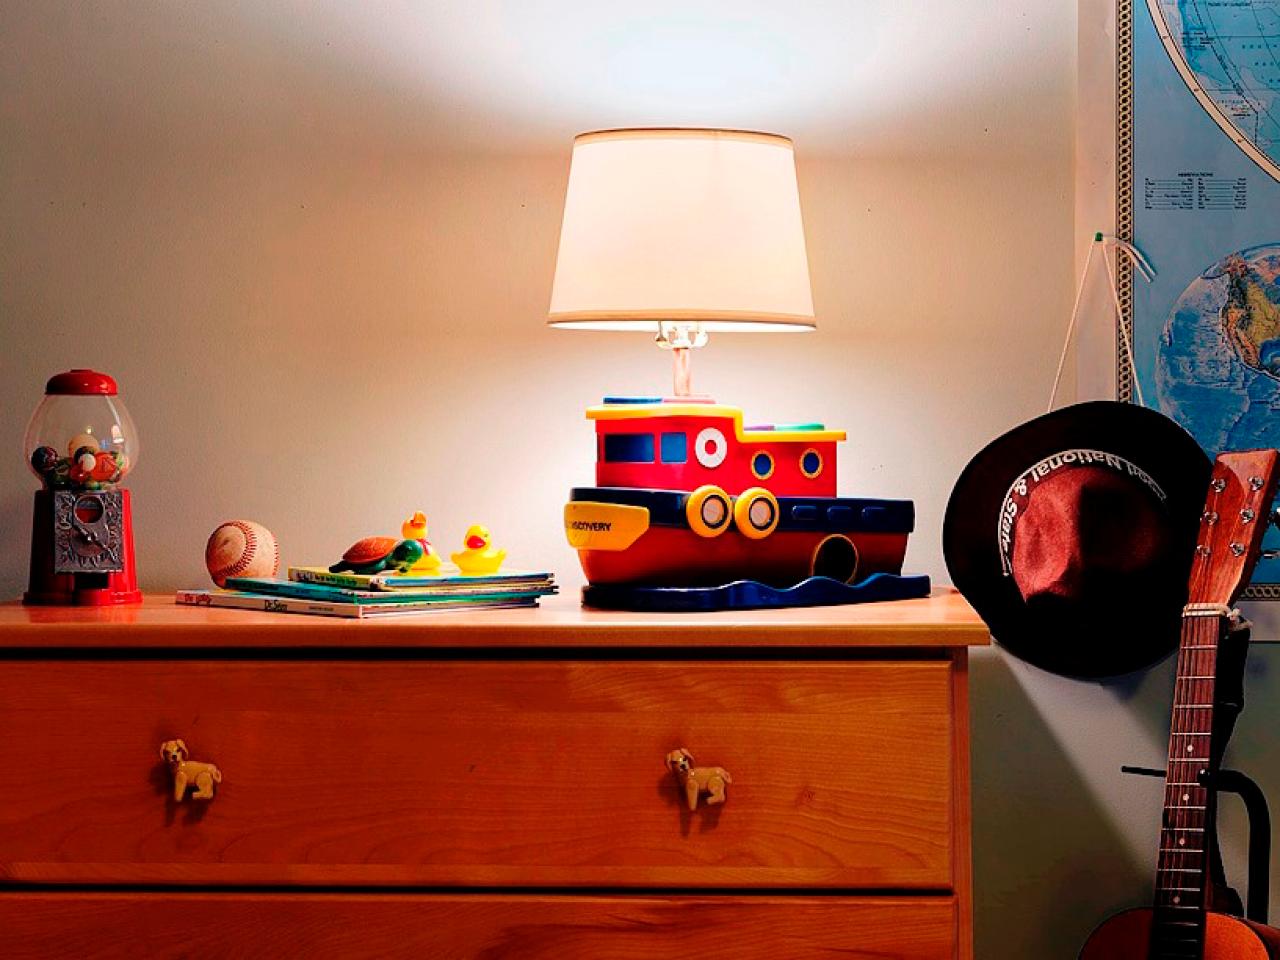 Upcycled Lamp From An Old Toy, Diy Wood Magnetic Table Lamp